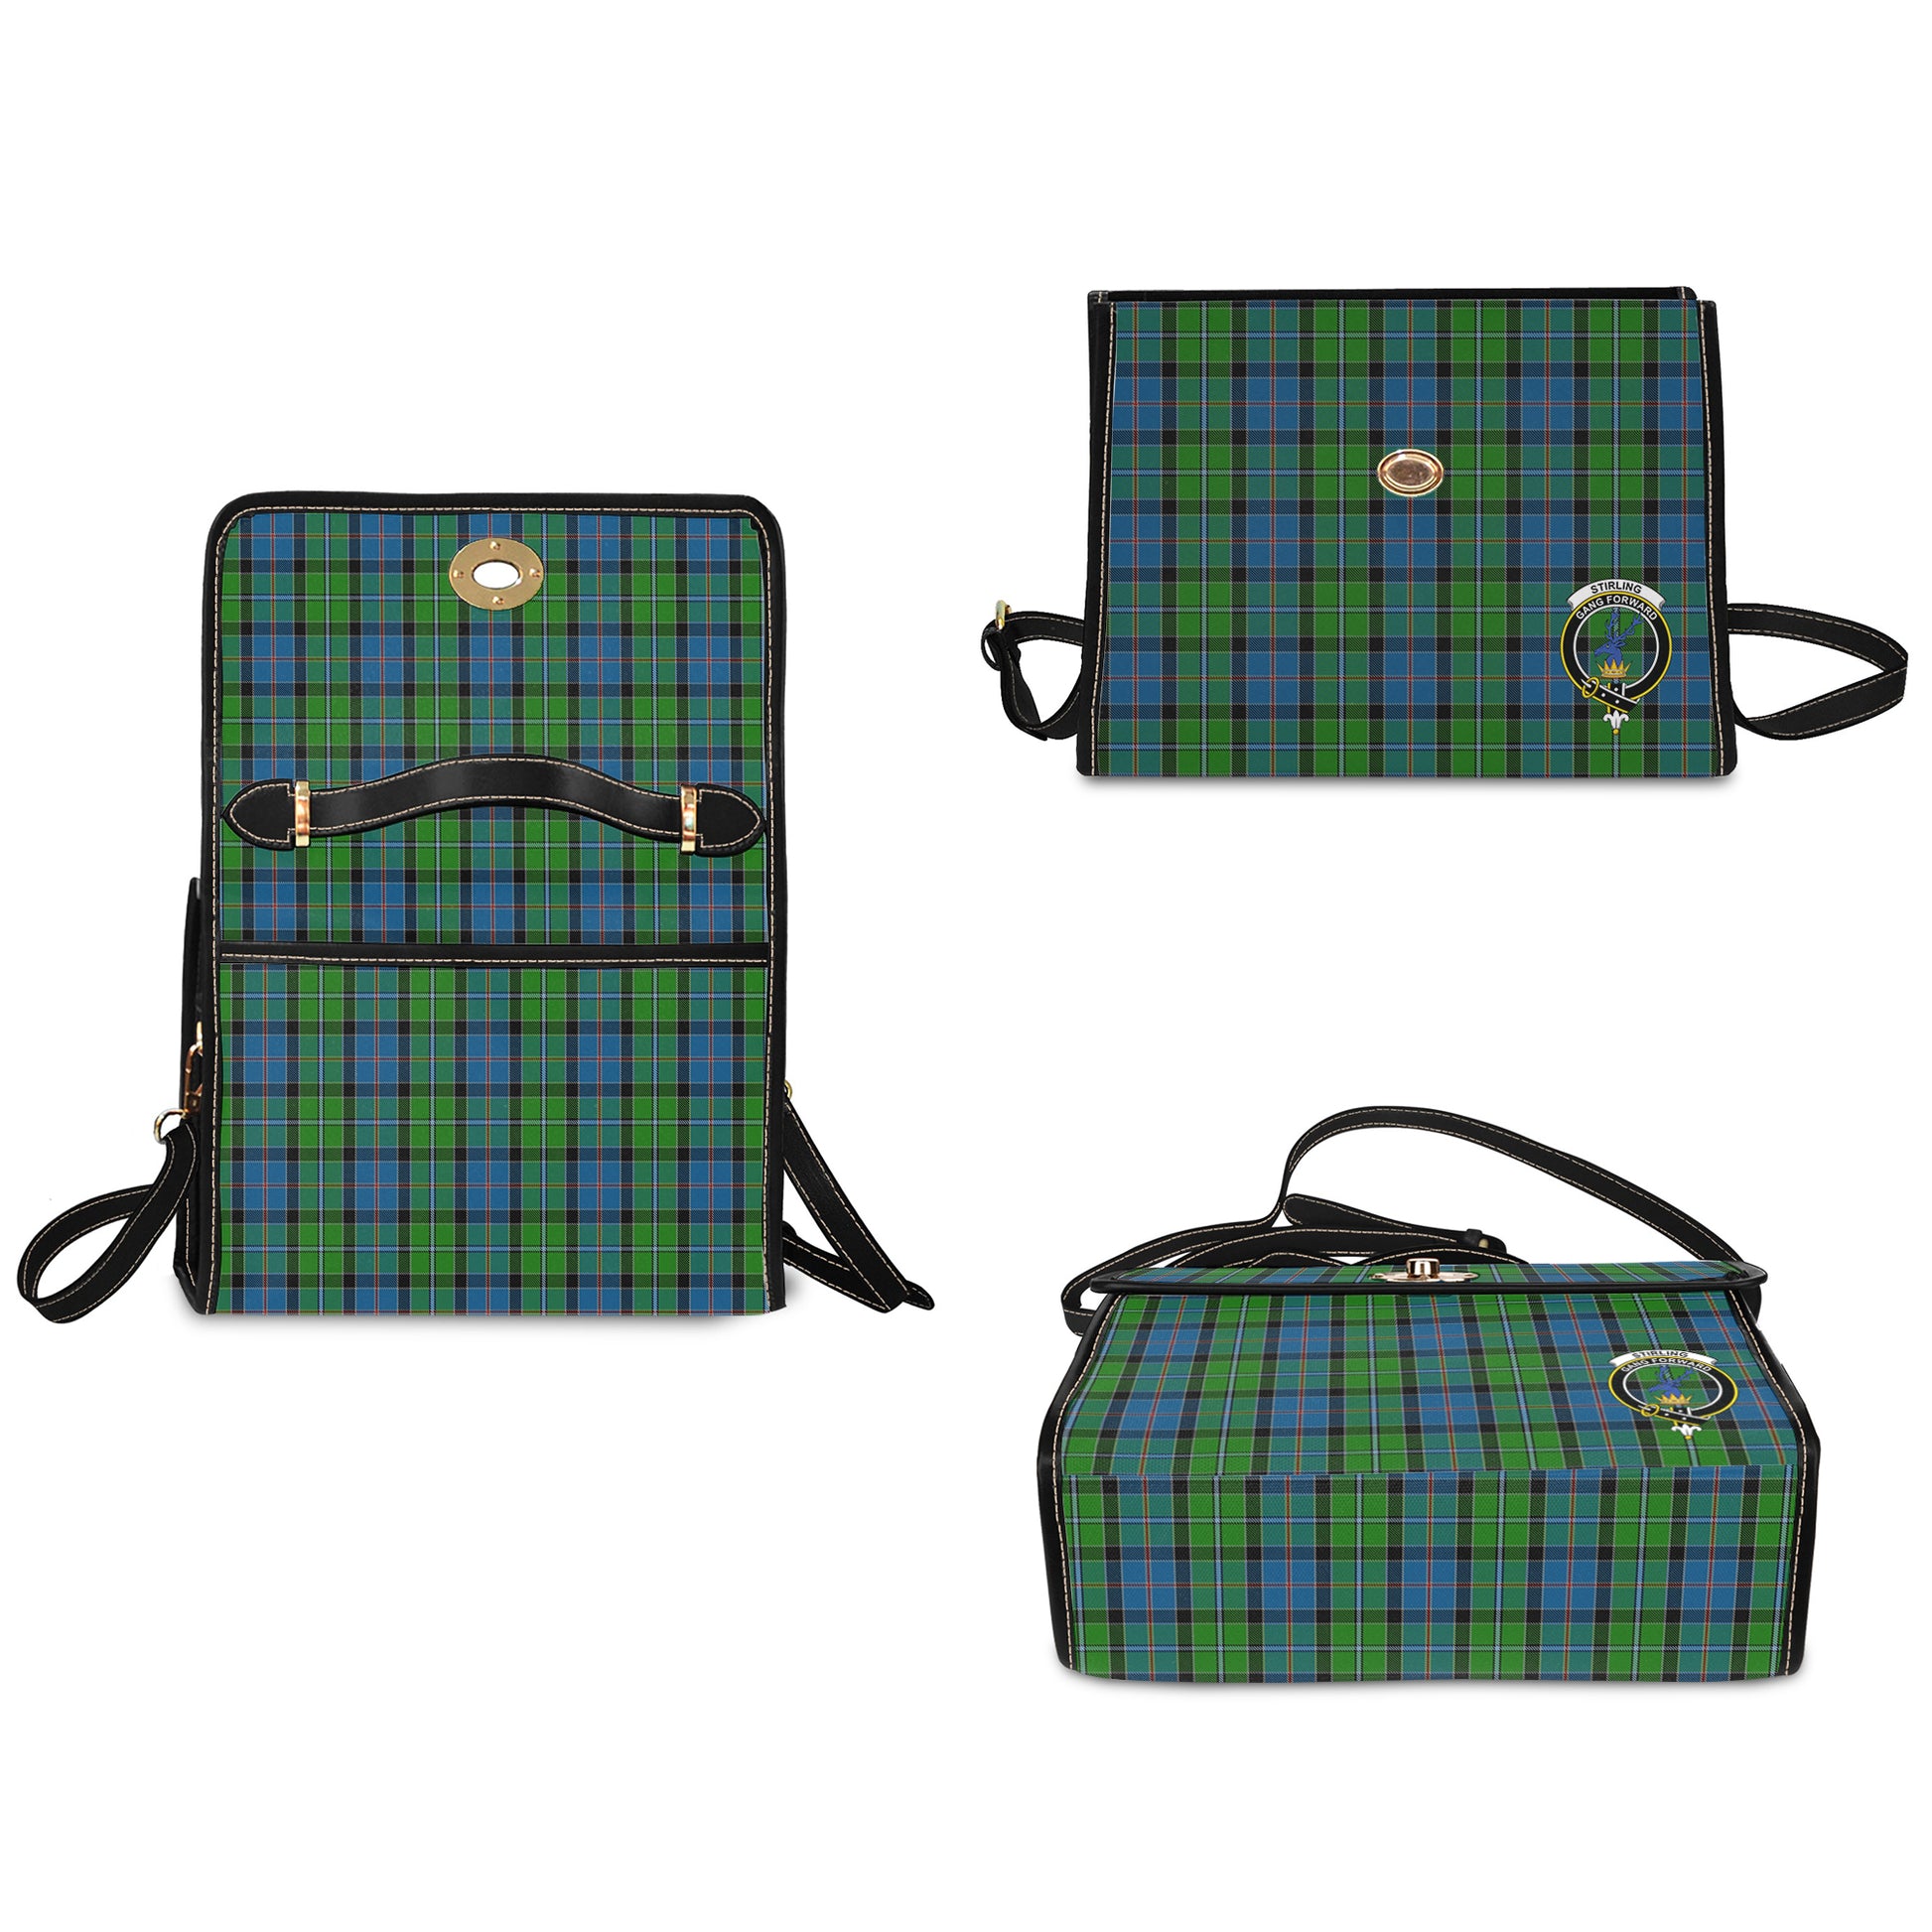 stirling-tartan-leather-strap-waterproof-canvas-bag-with-family-crest